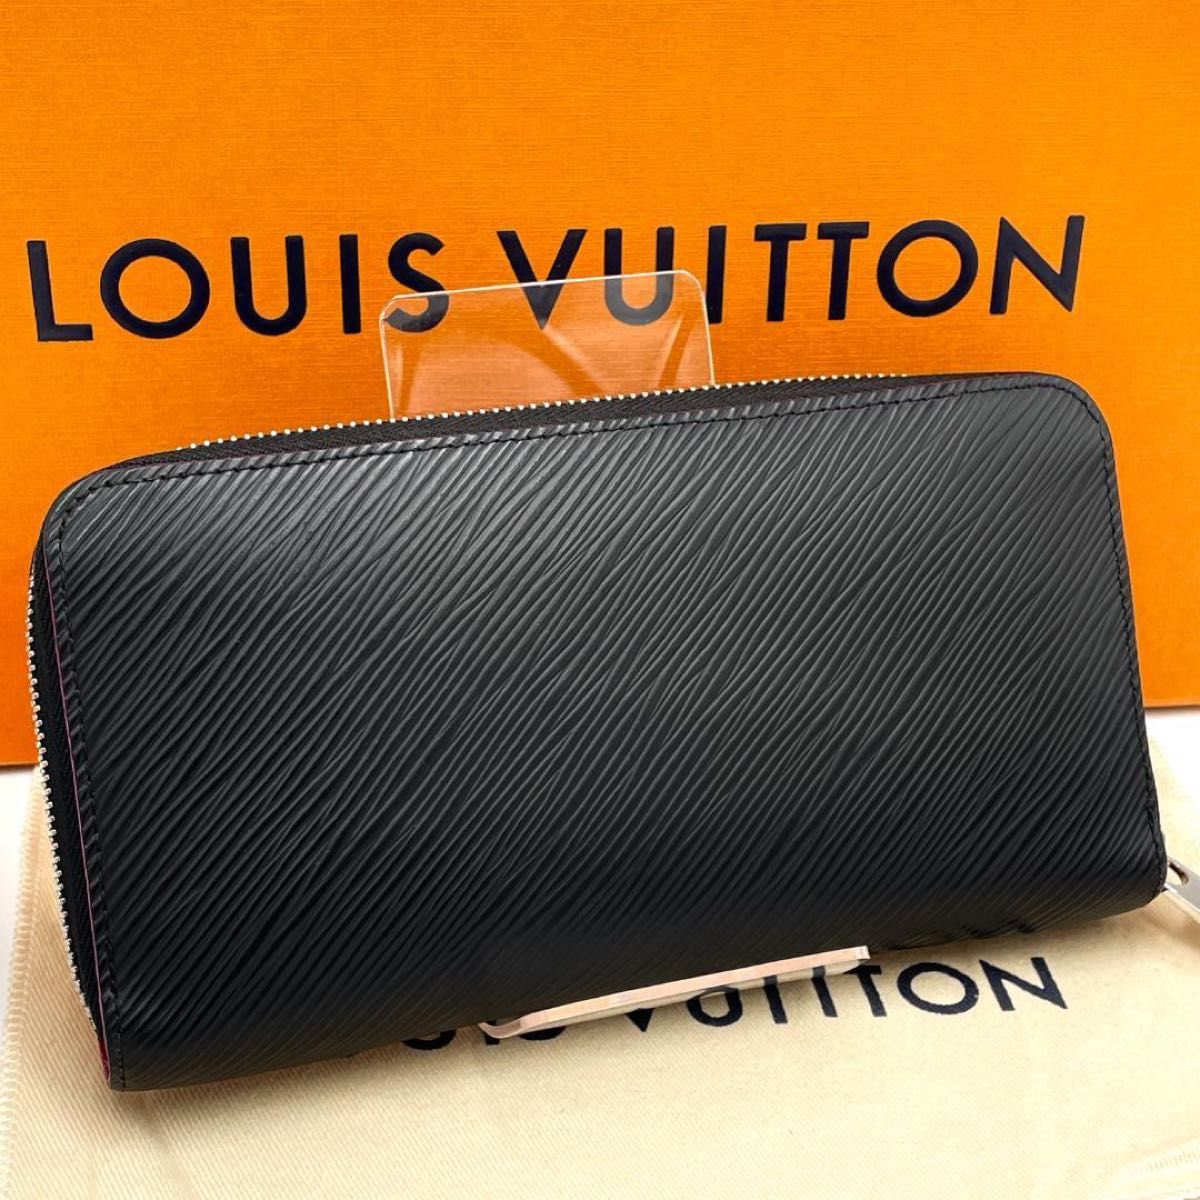 LOUIS VUITTON ルイヴィトン　長財布　エピ　ジッピーウォレット　黒×ピンク